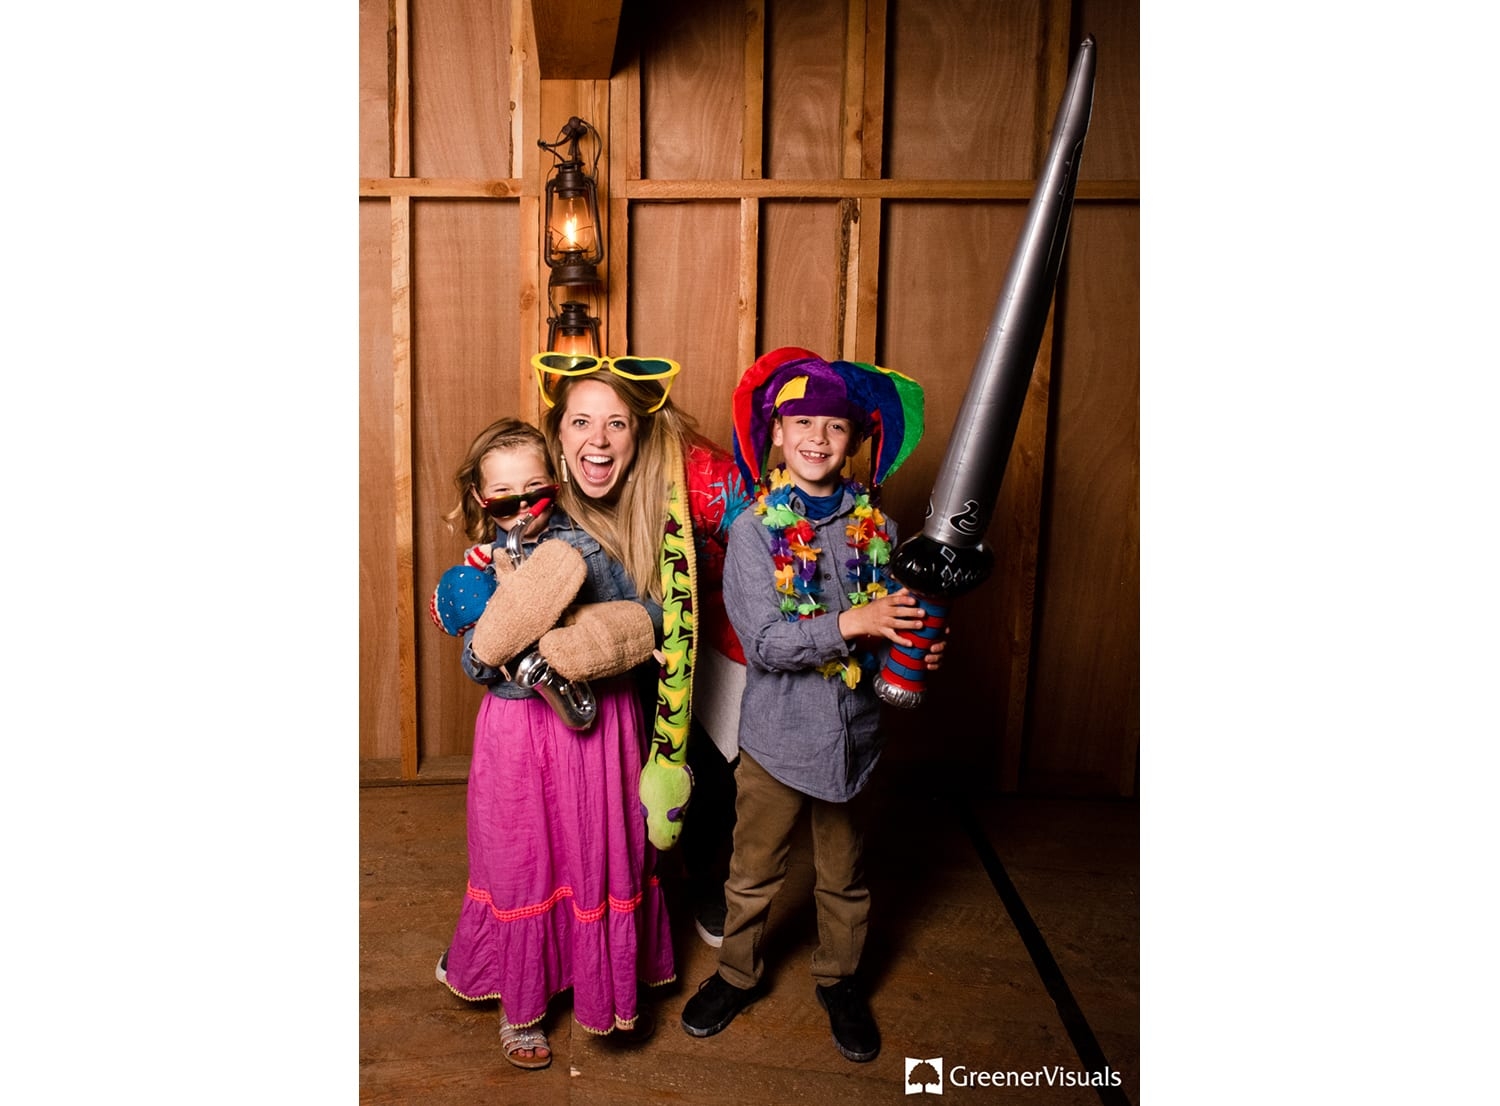 snake-sword-play-photo-booth-headwaters-ranch